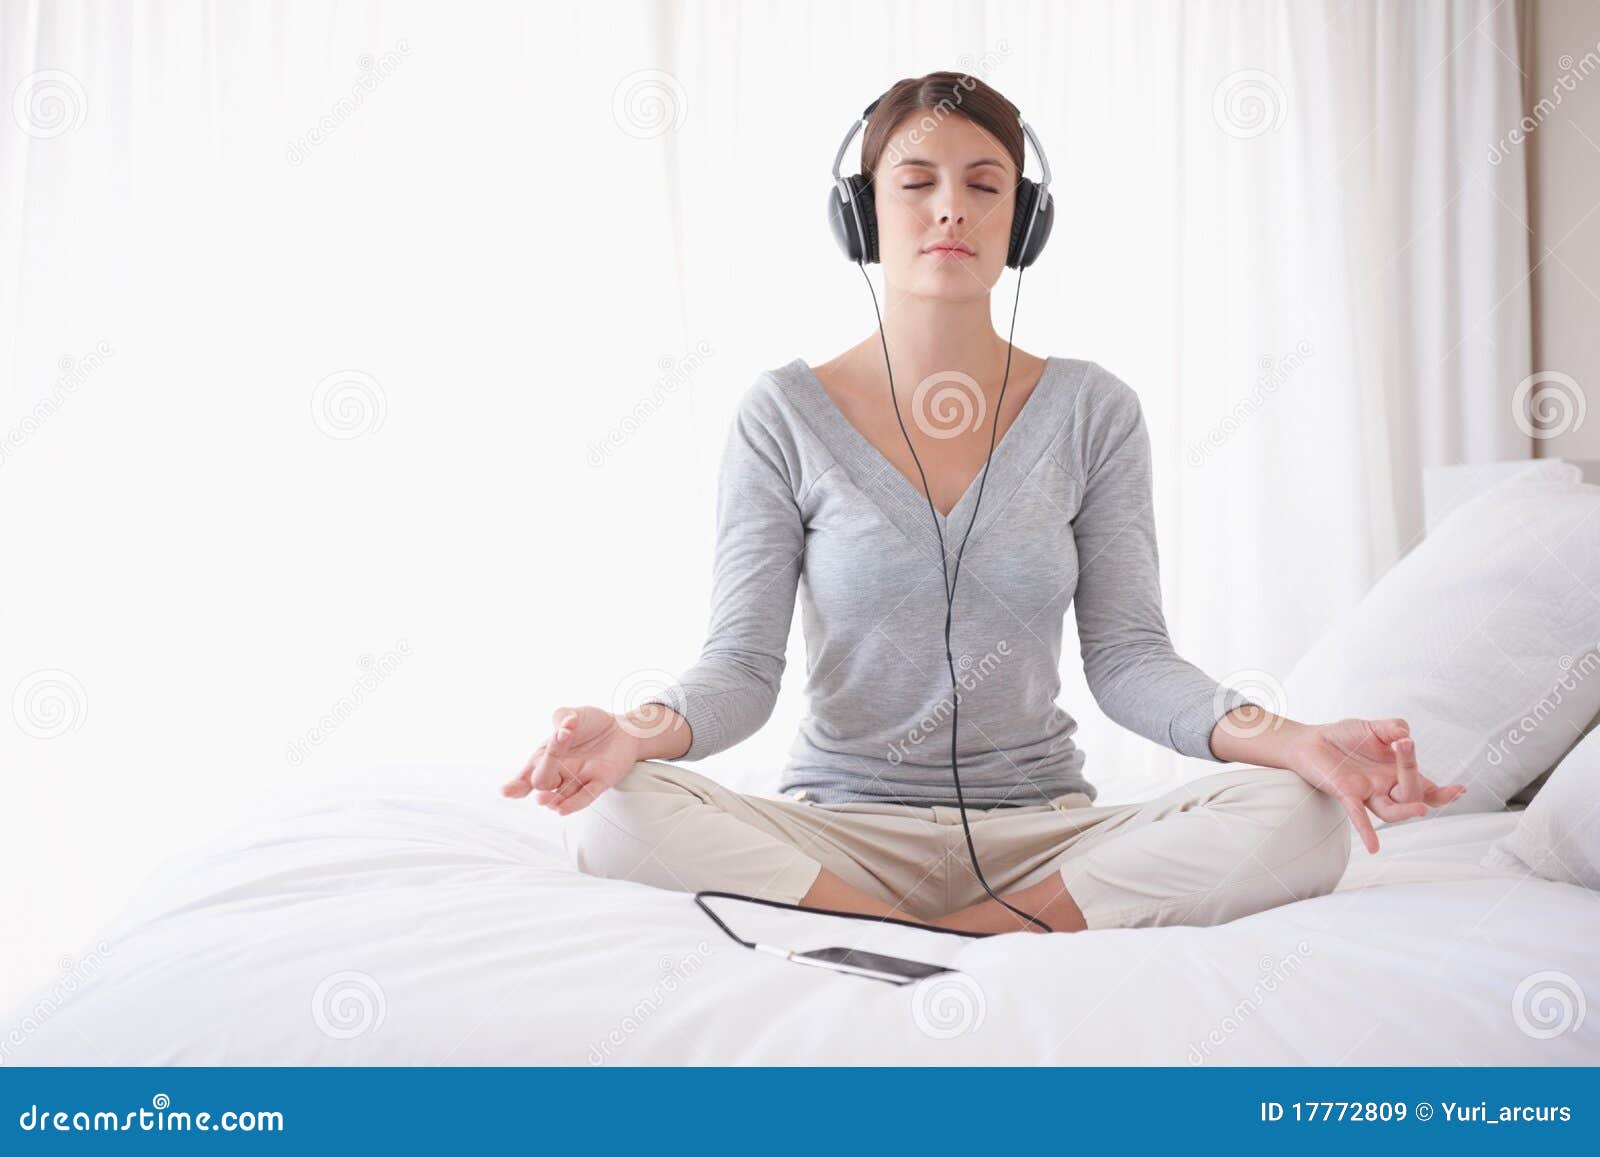 Royalty Free Stock Images Woman With Headphones In Lotus Position On Bed Image 17772809